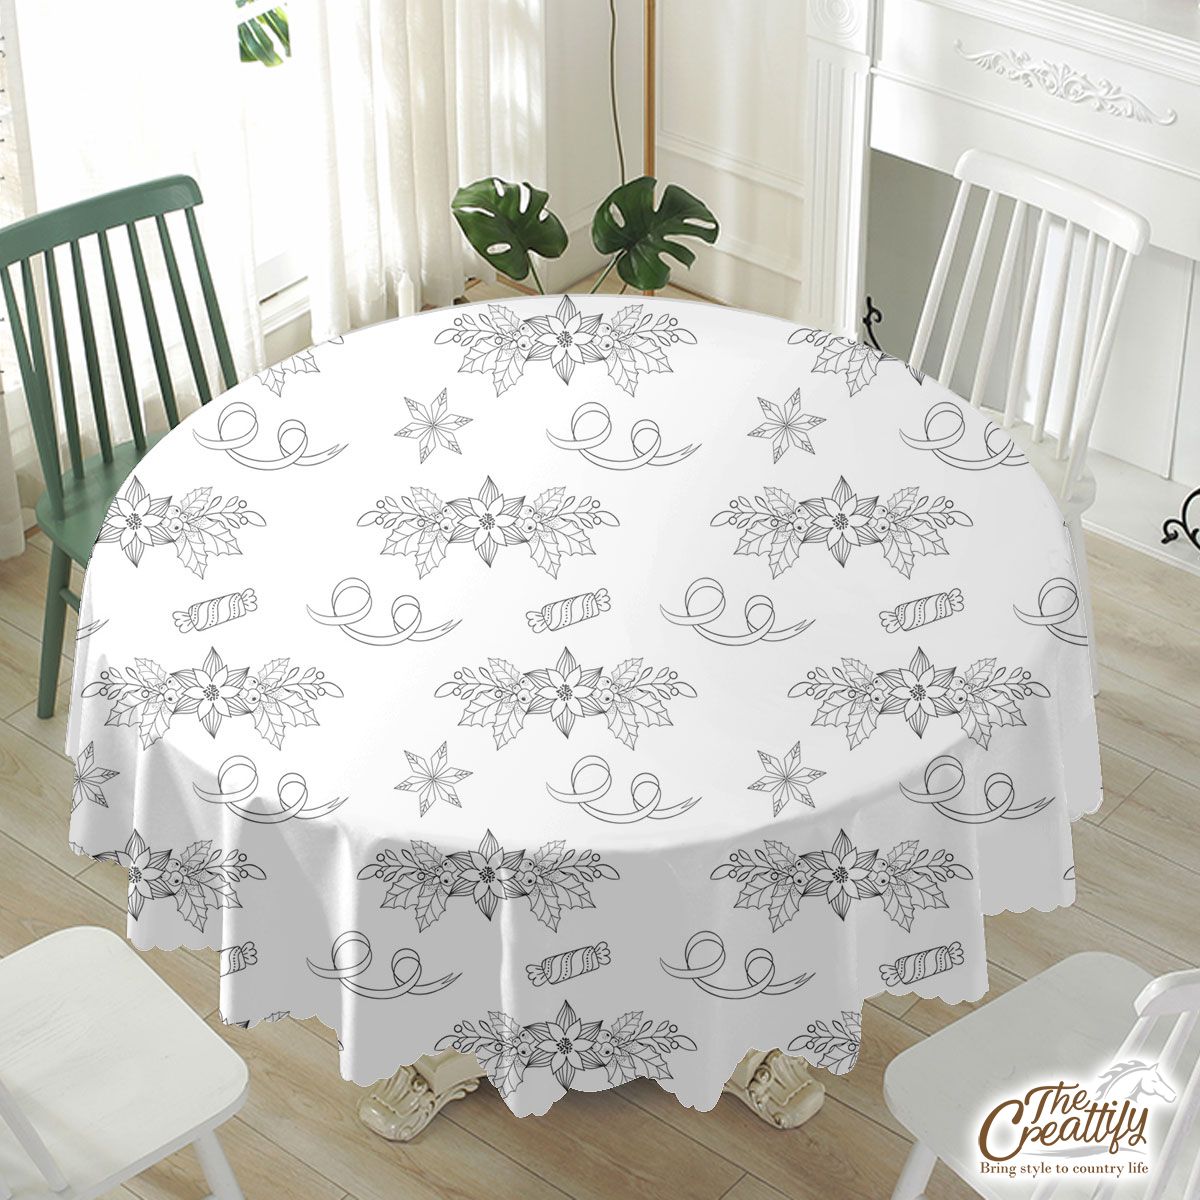 Black And White Christmas Wreath With Snowfalke Waterproof Tablecloth